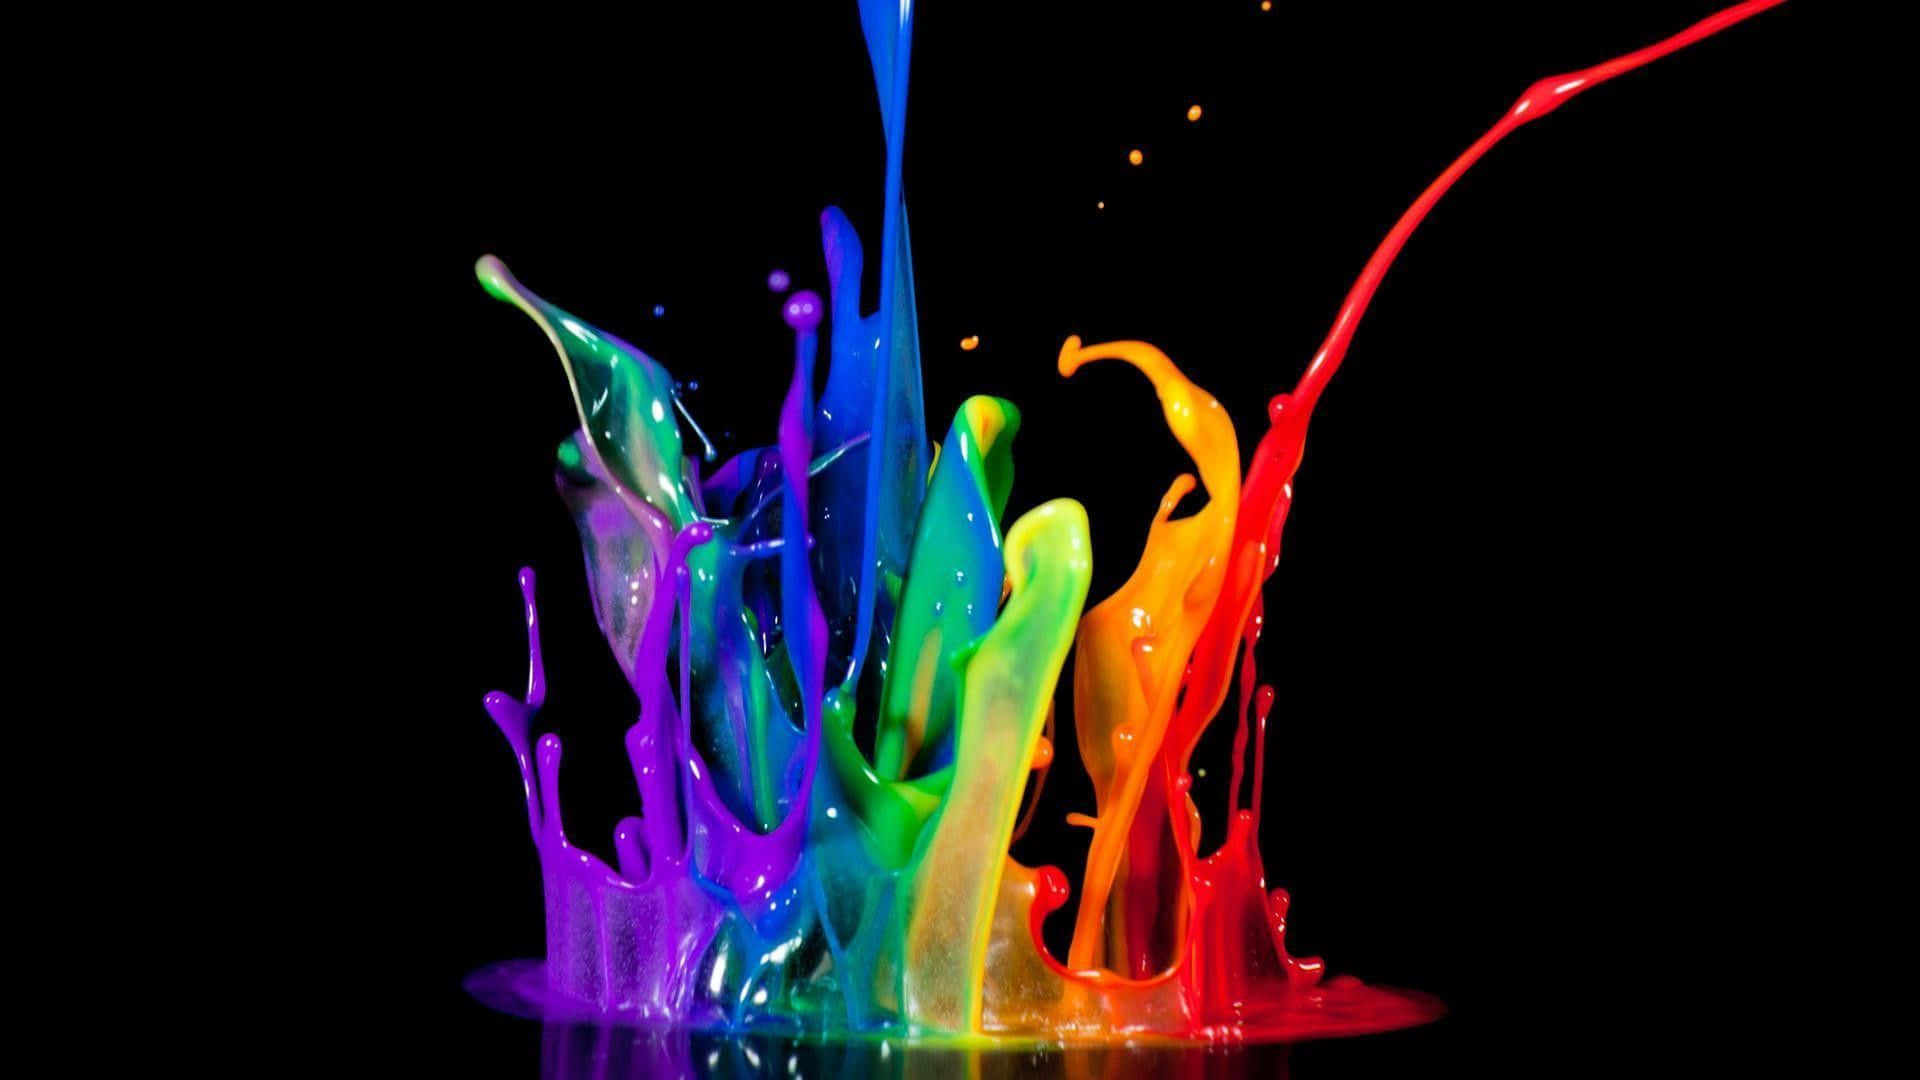 Download A Colorful Splash of Fun! | Wallpapers.com